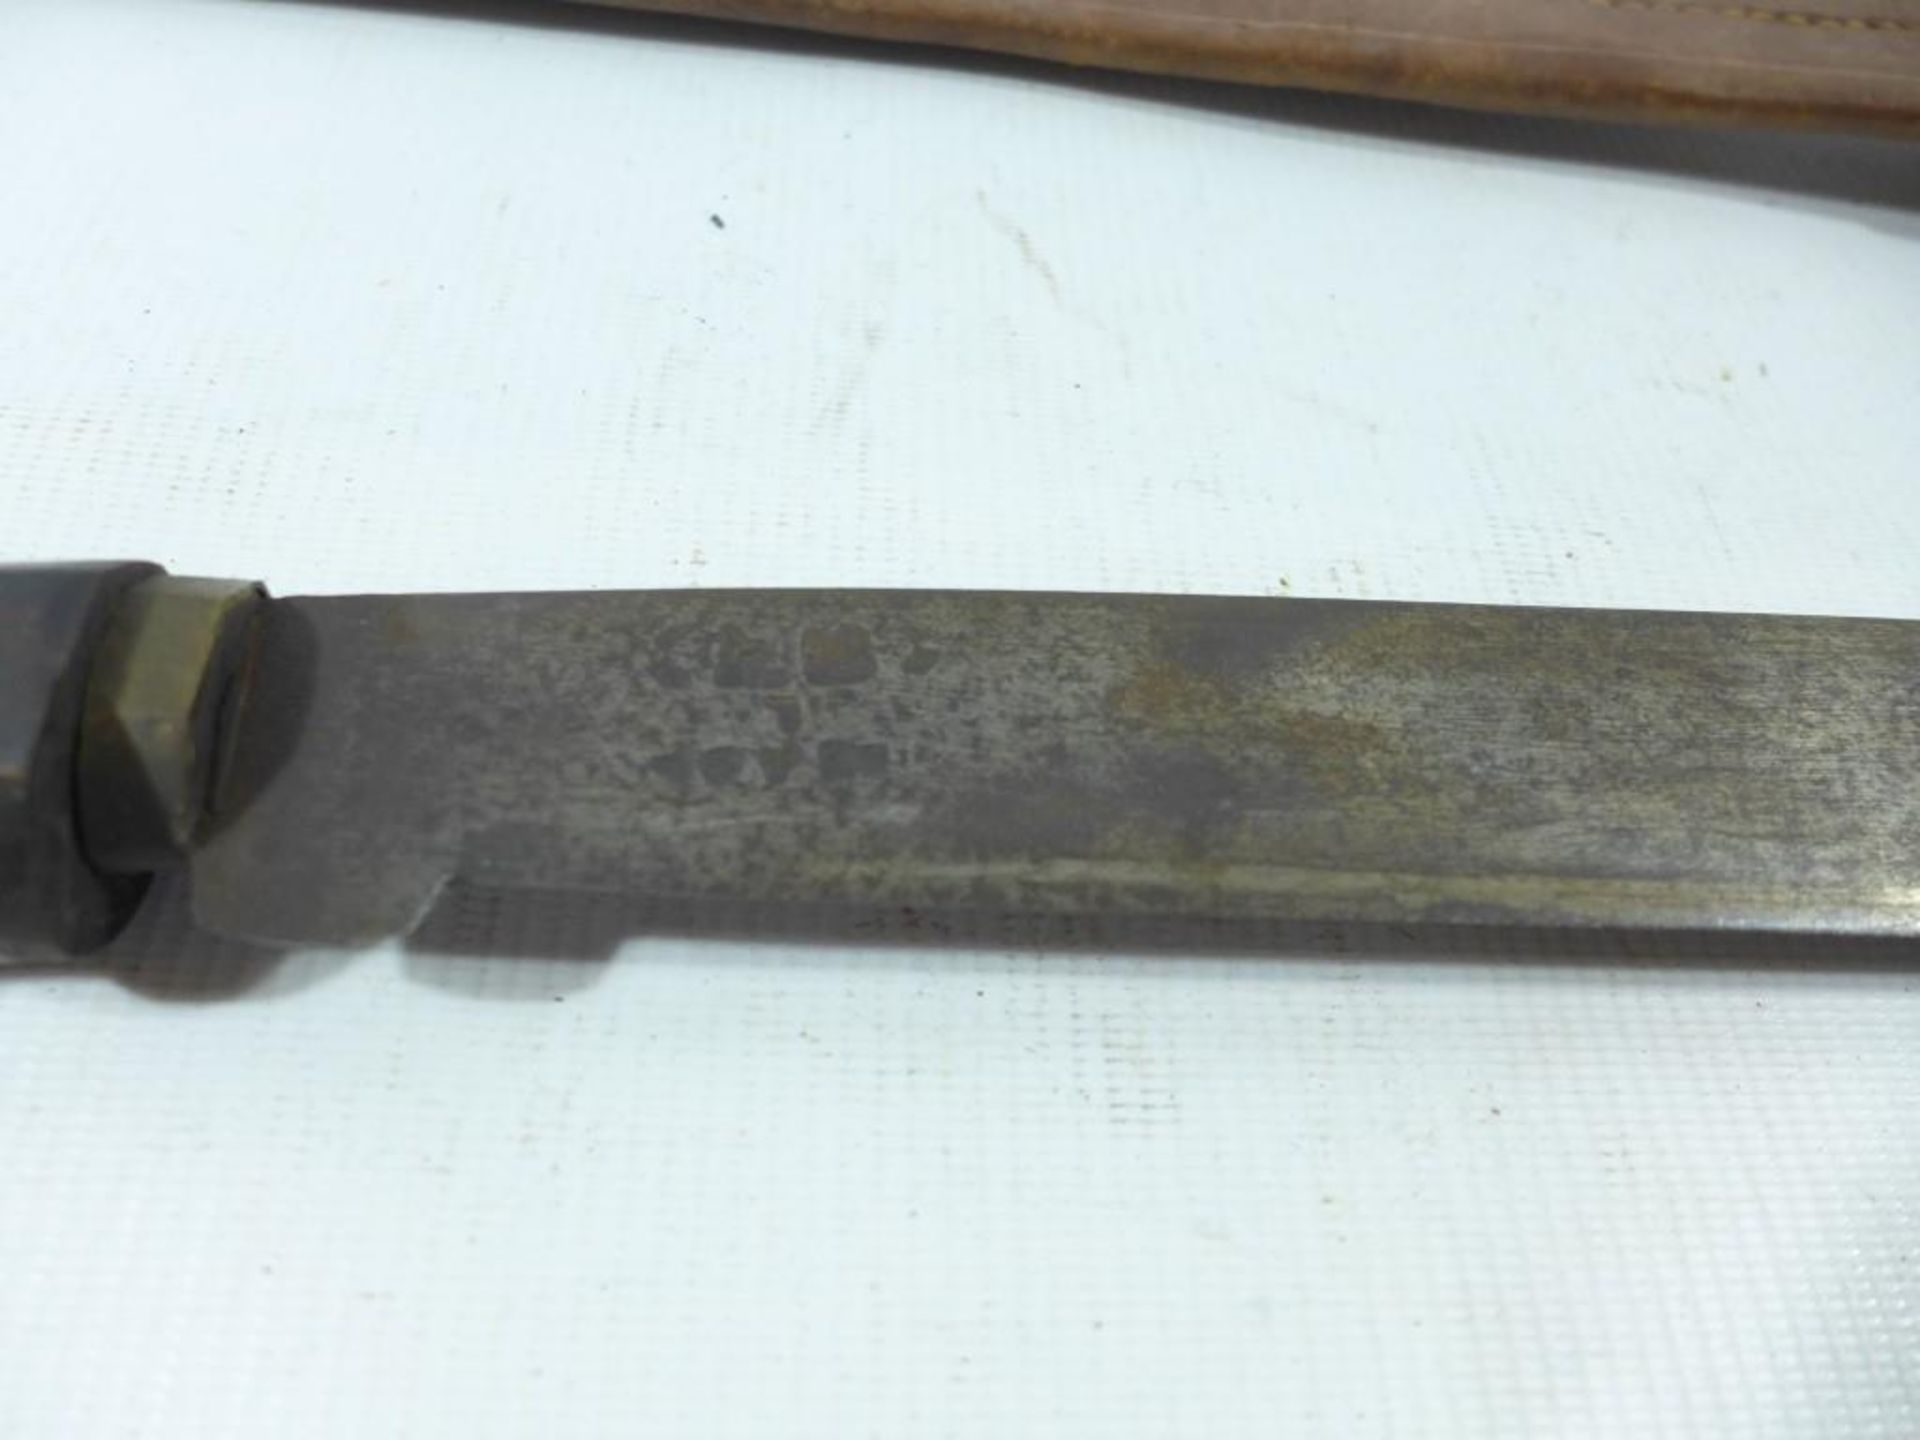 A MID 20TH CENTURY MACHETTE AND SCABBARD, 47CM BLADE - Image 2 of 5